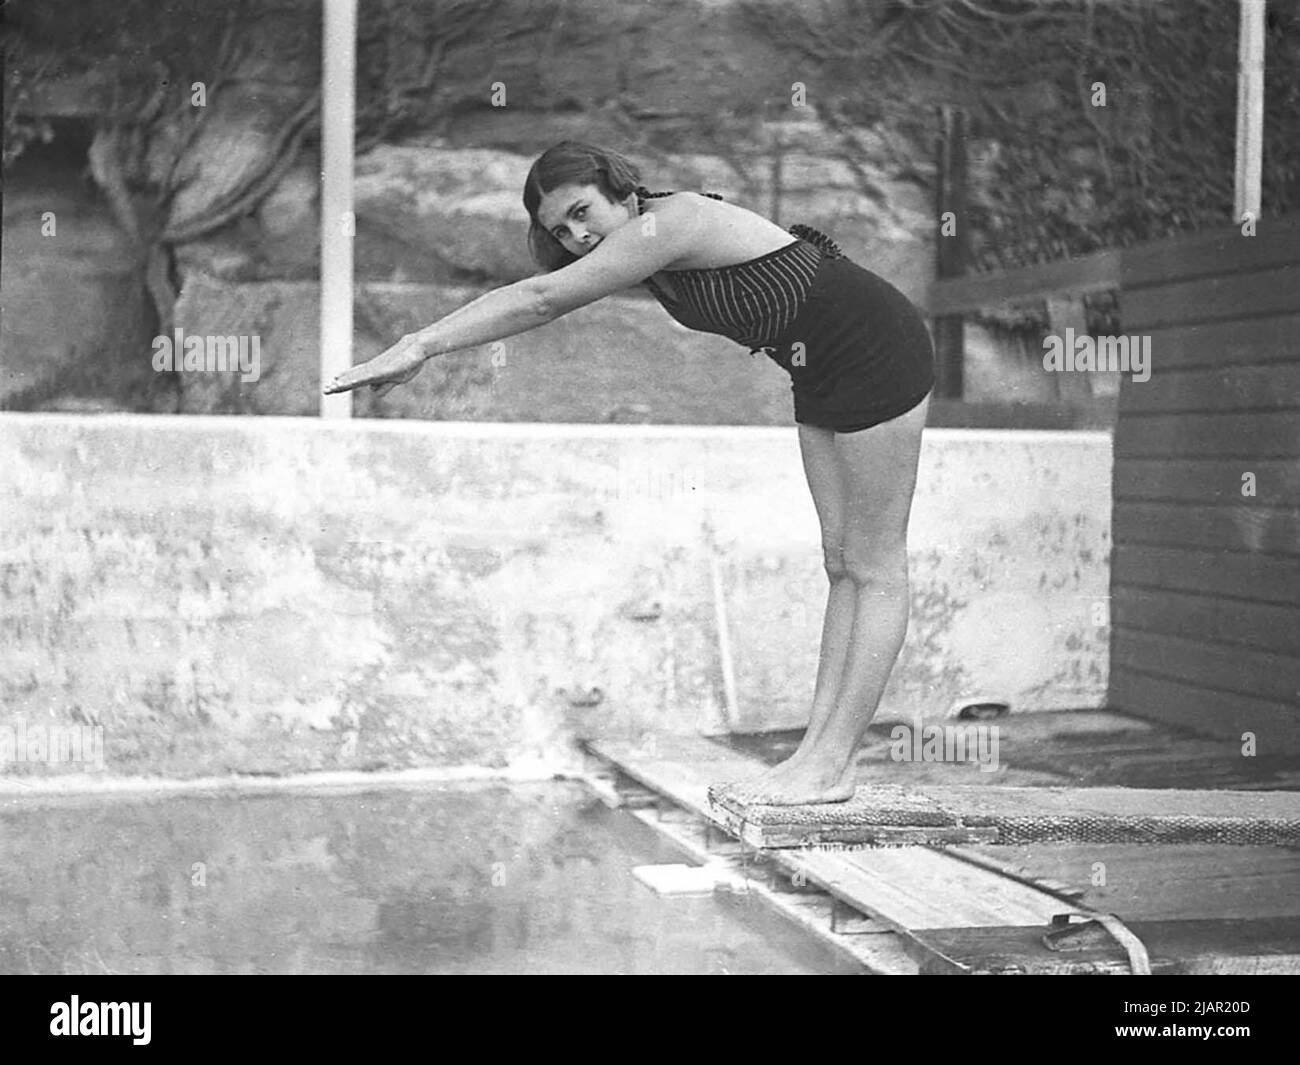 Posing diver Black and White Stock Photos & Images - Alamy